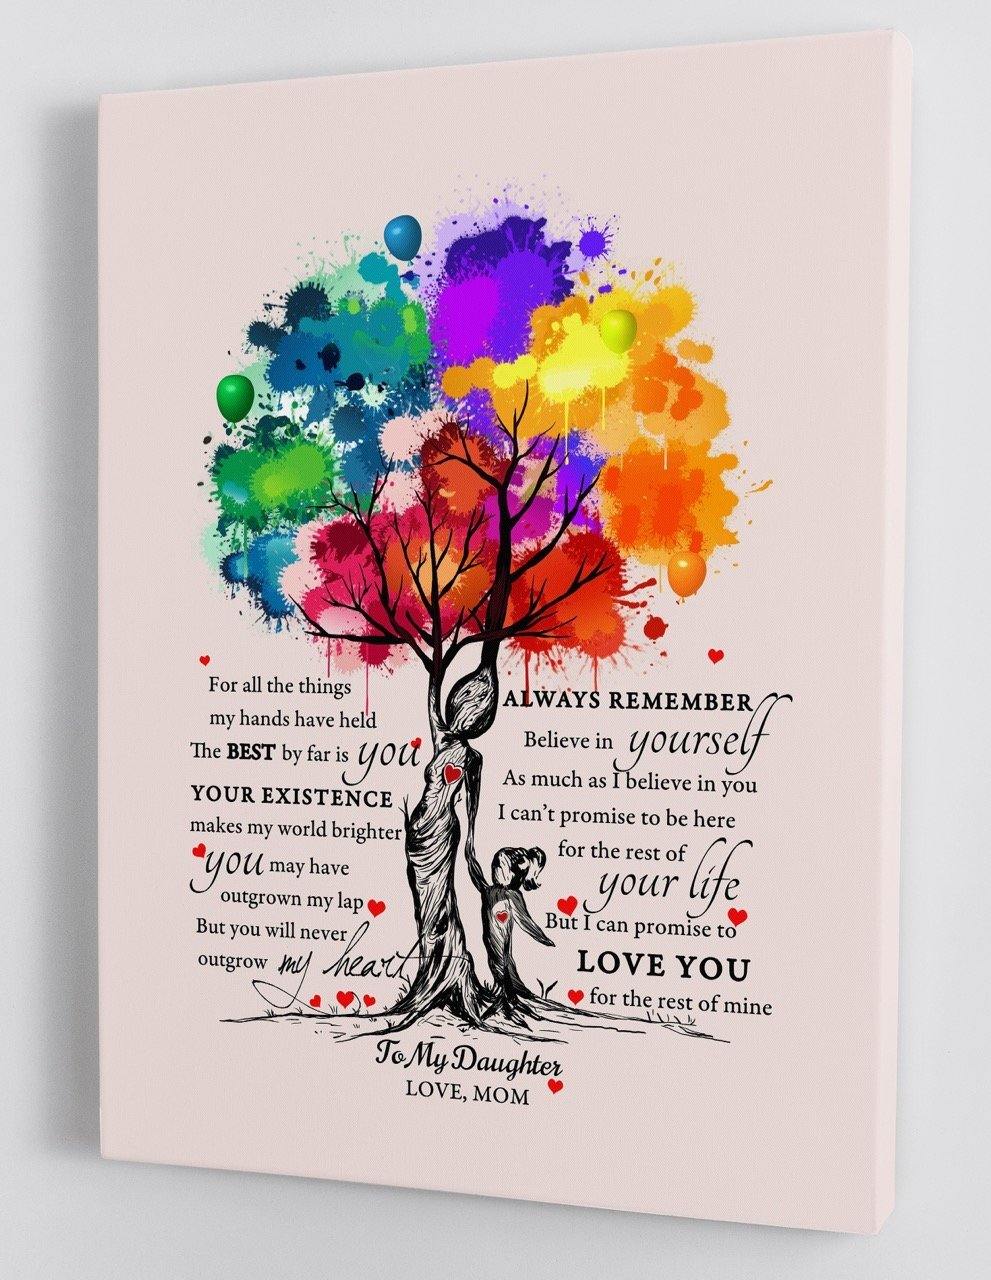 To My Daughter - From Mom - Framed Canvas Gift MD001 - DivesArt LLC